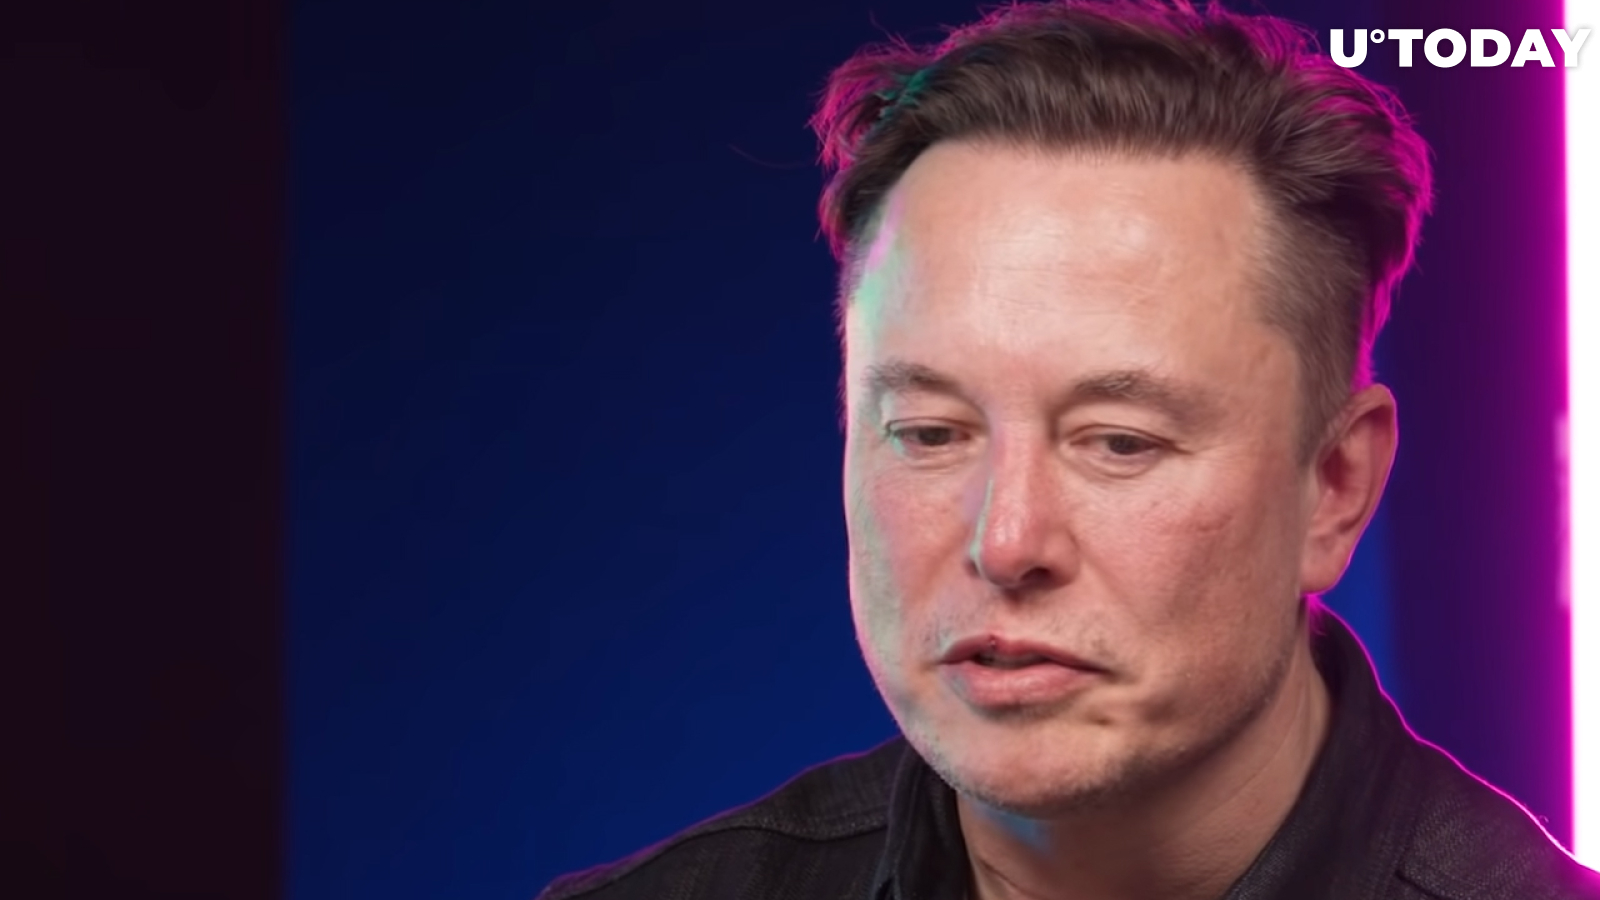 Elon Musk Goes Hard on Twitter, Calls Out Crypto Scammers in Every Thread